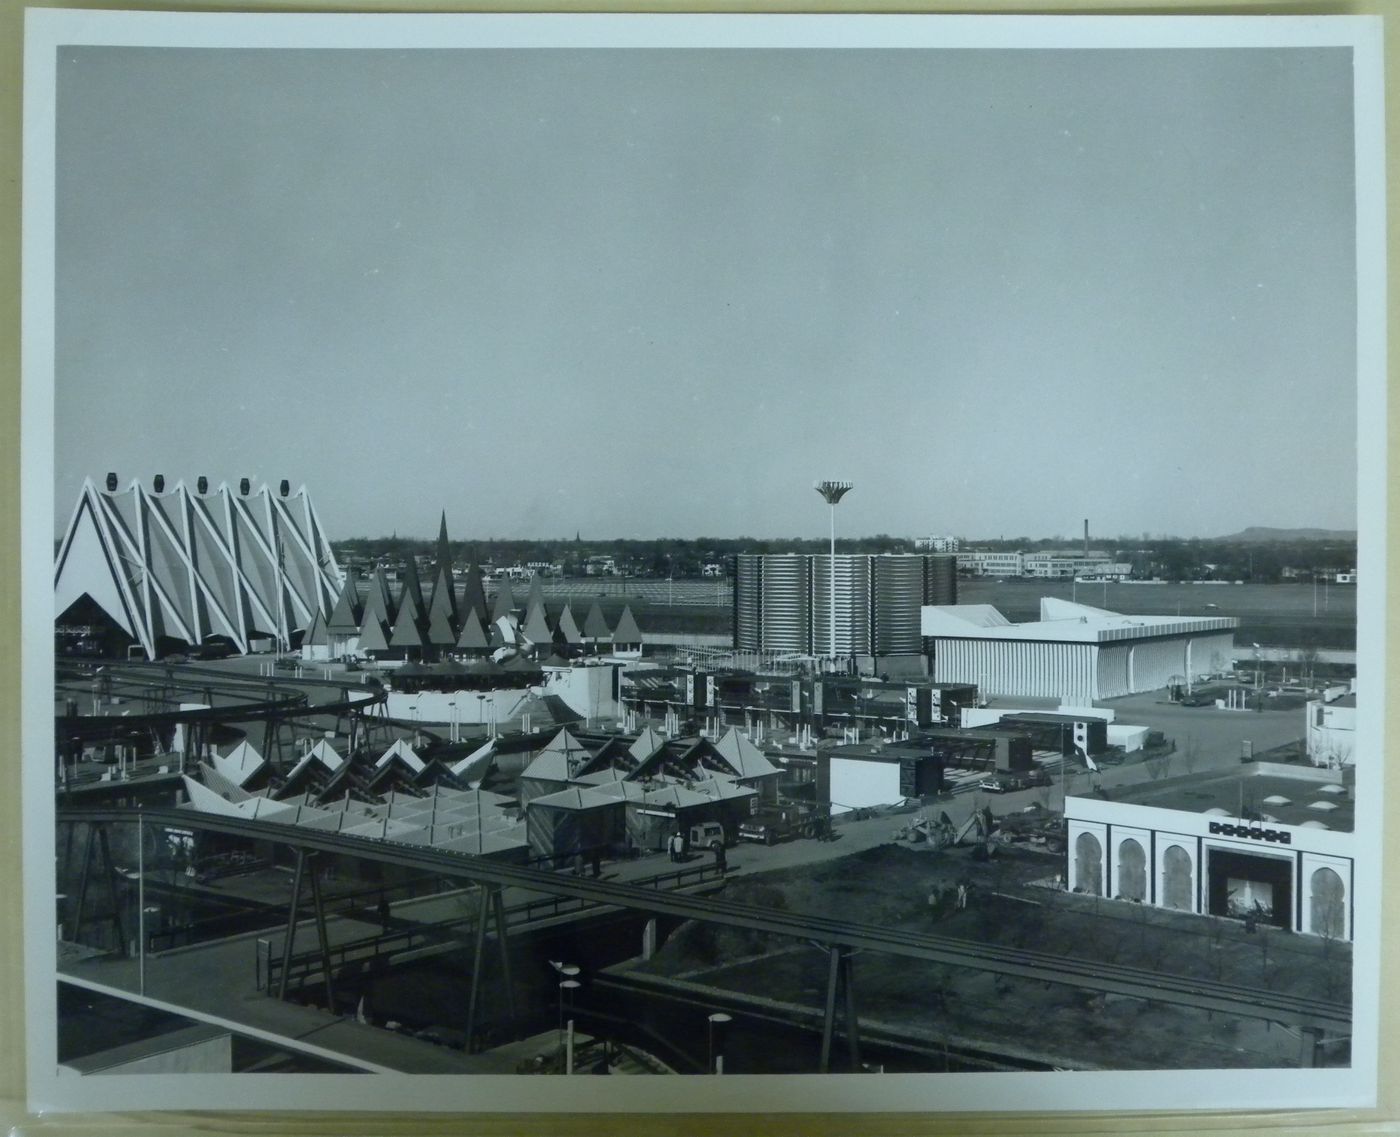 View of the Steel, Canadian Pulp and Paper, Canadian Pacific-Cominco and Arab Nations Pavilions with the minirail in foreground, Expo 67, Montréal, Québec